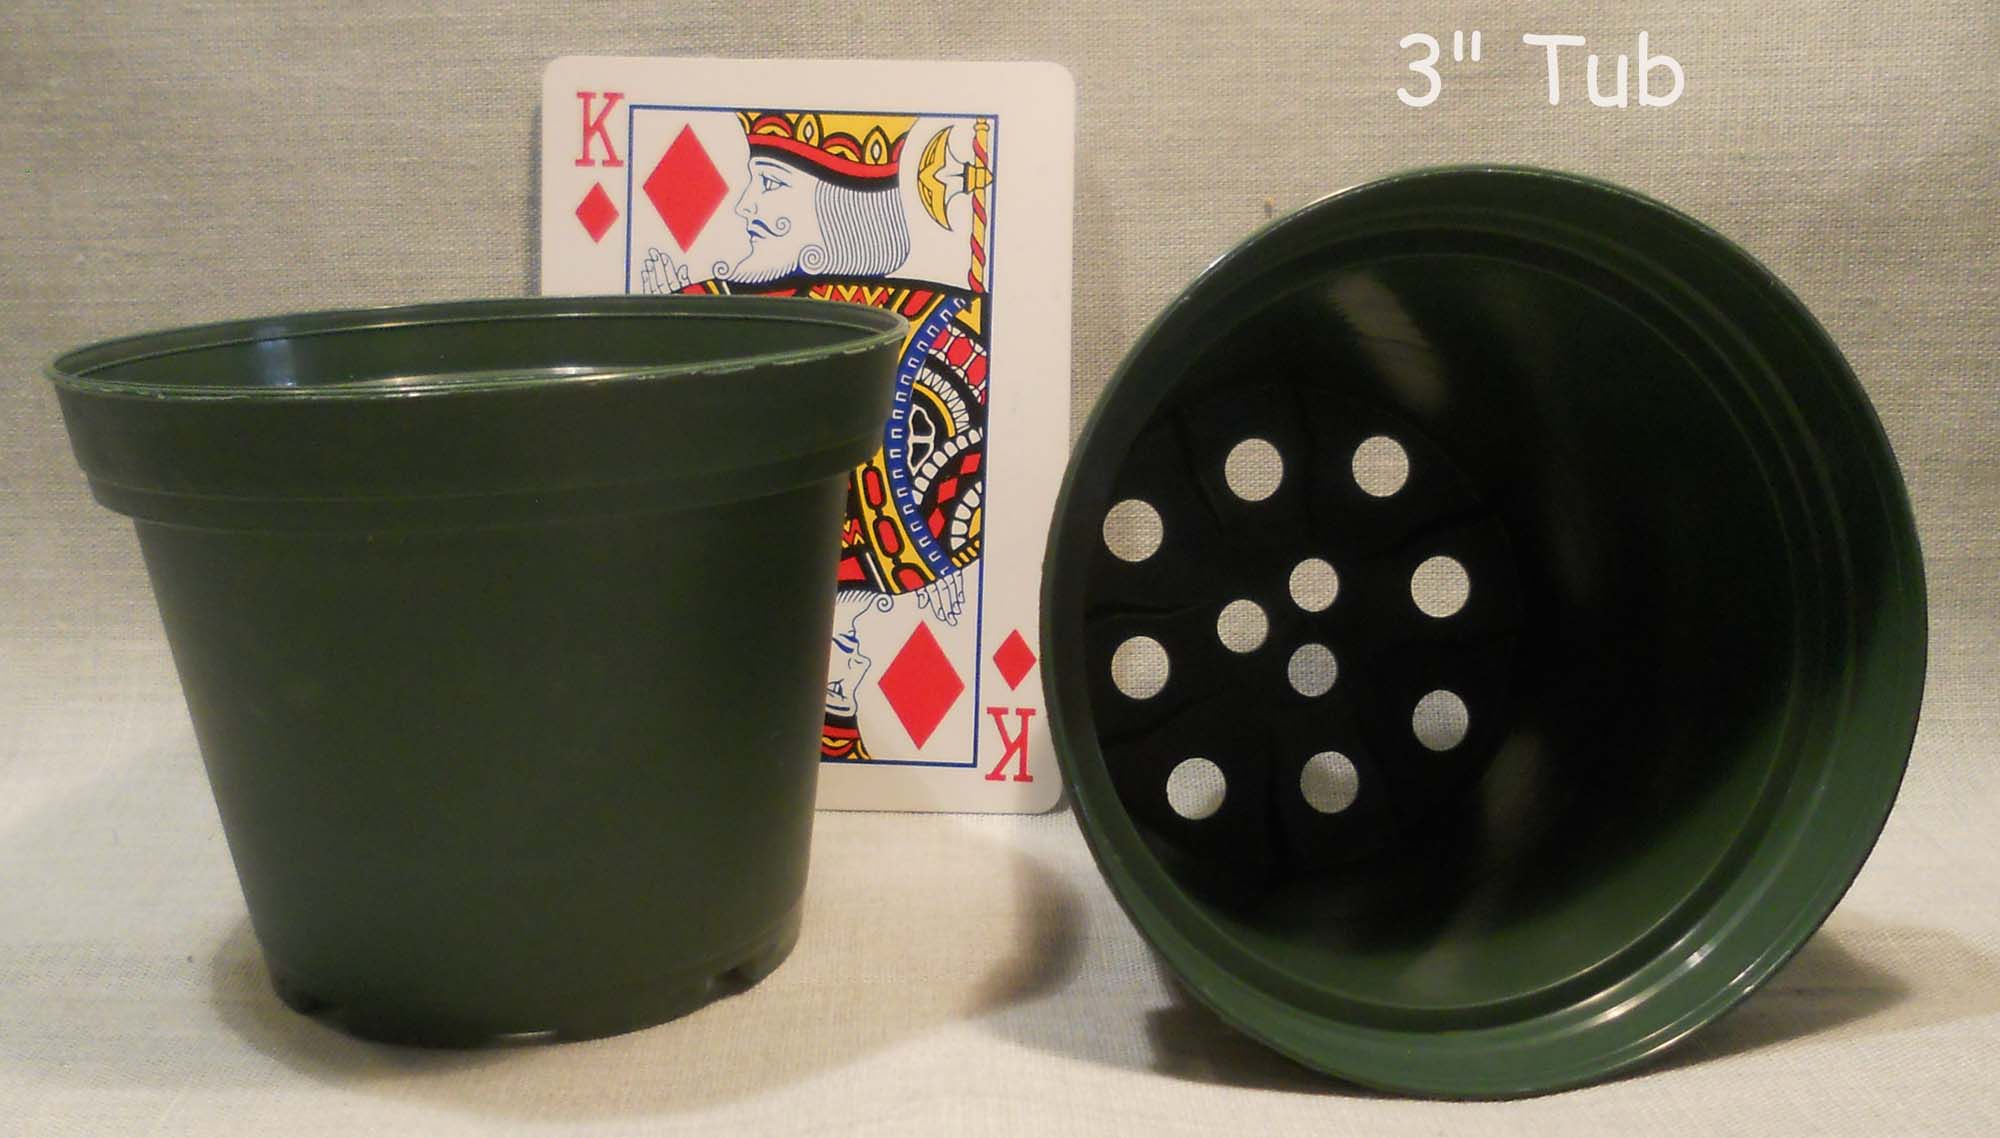 3" tub with playing card